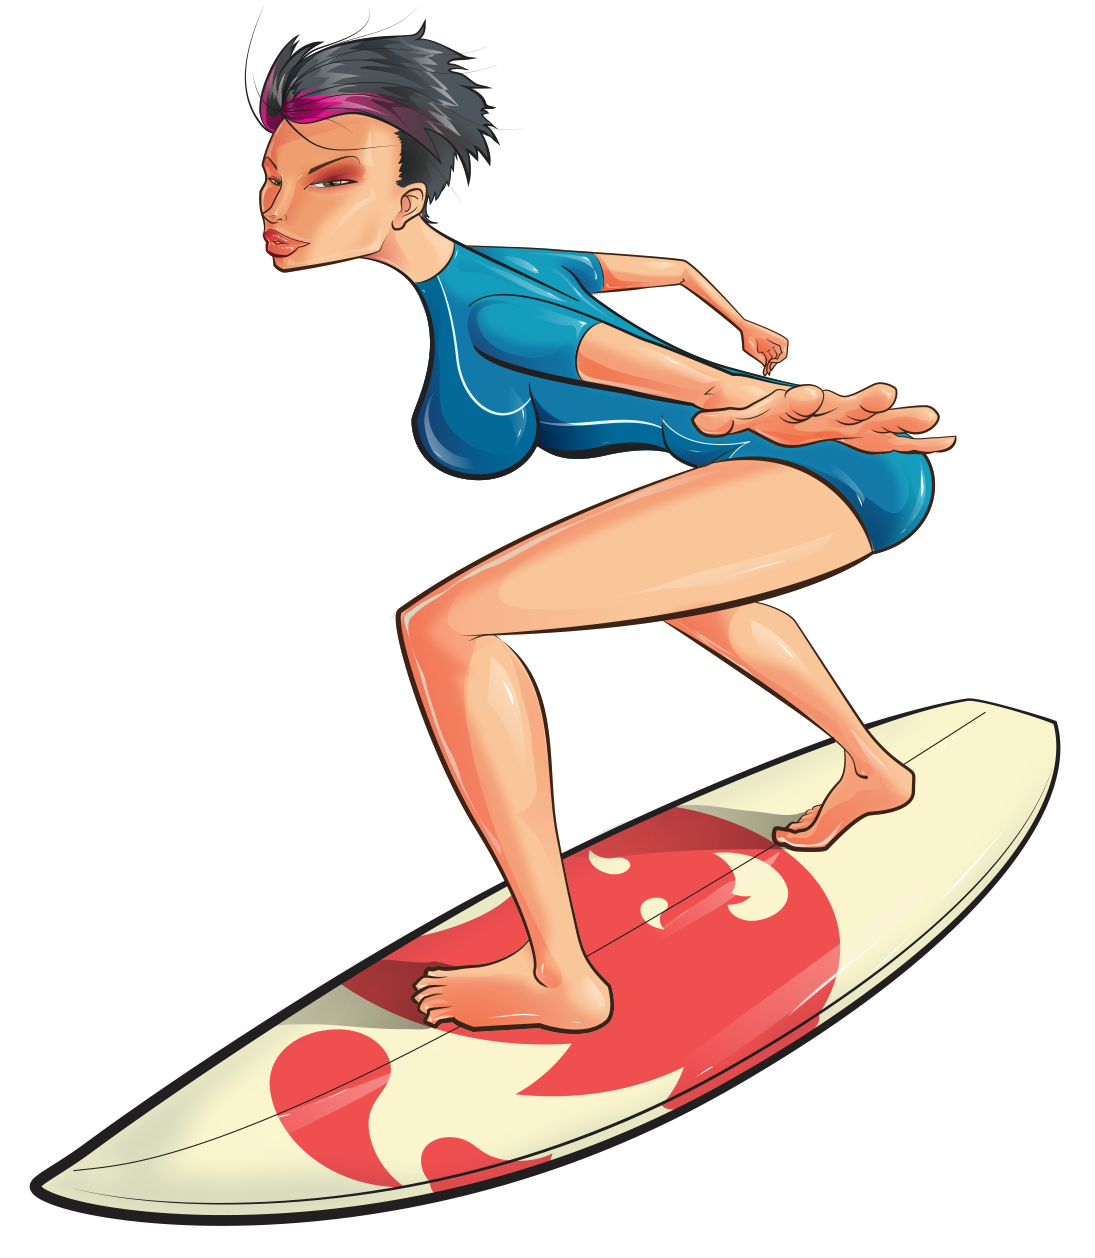 Surfing Free Download Png PNG